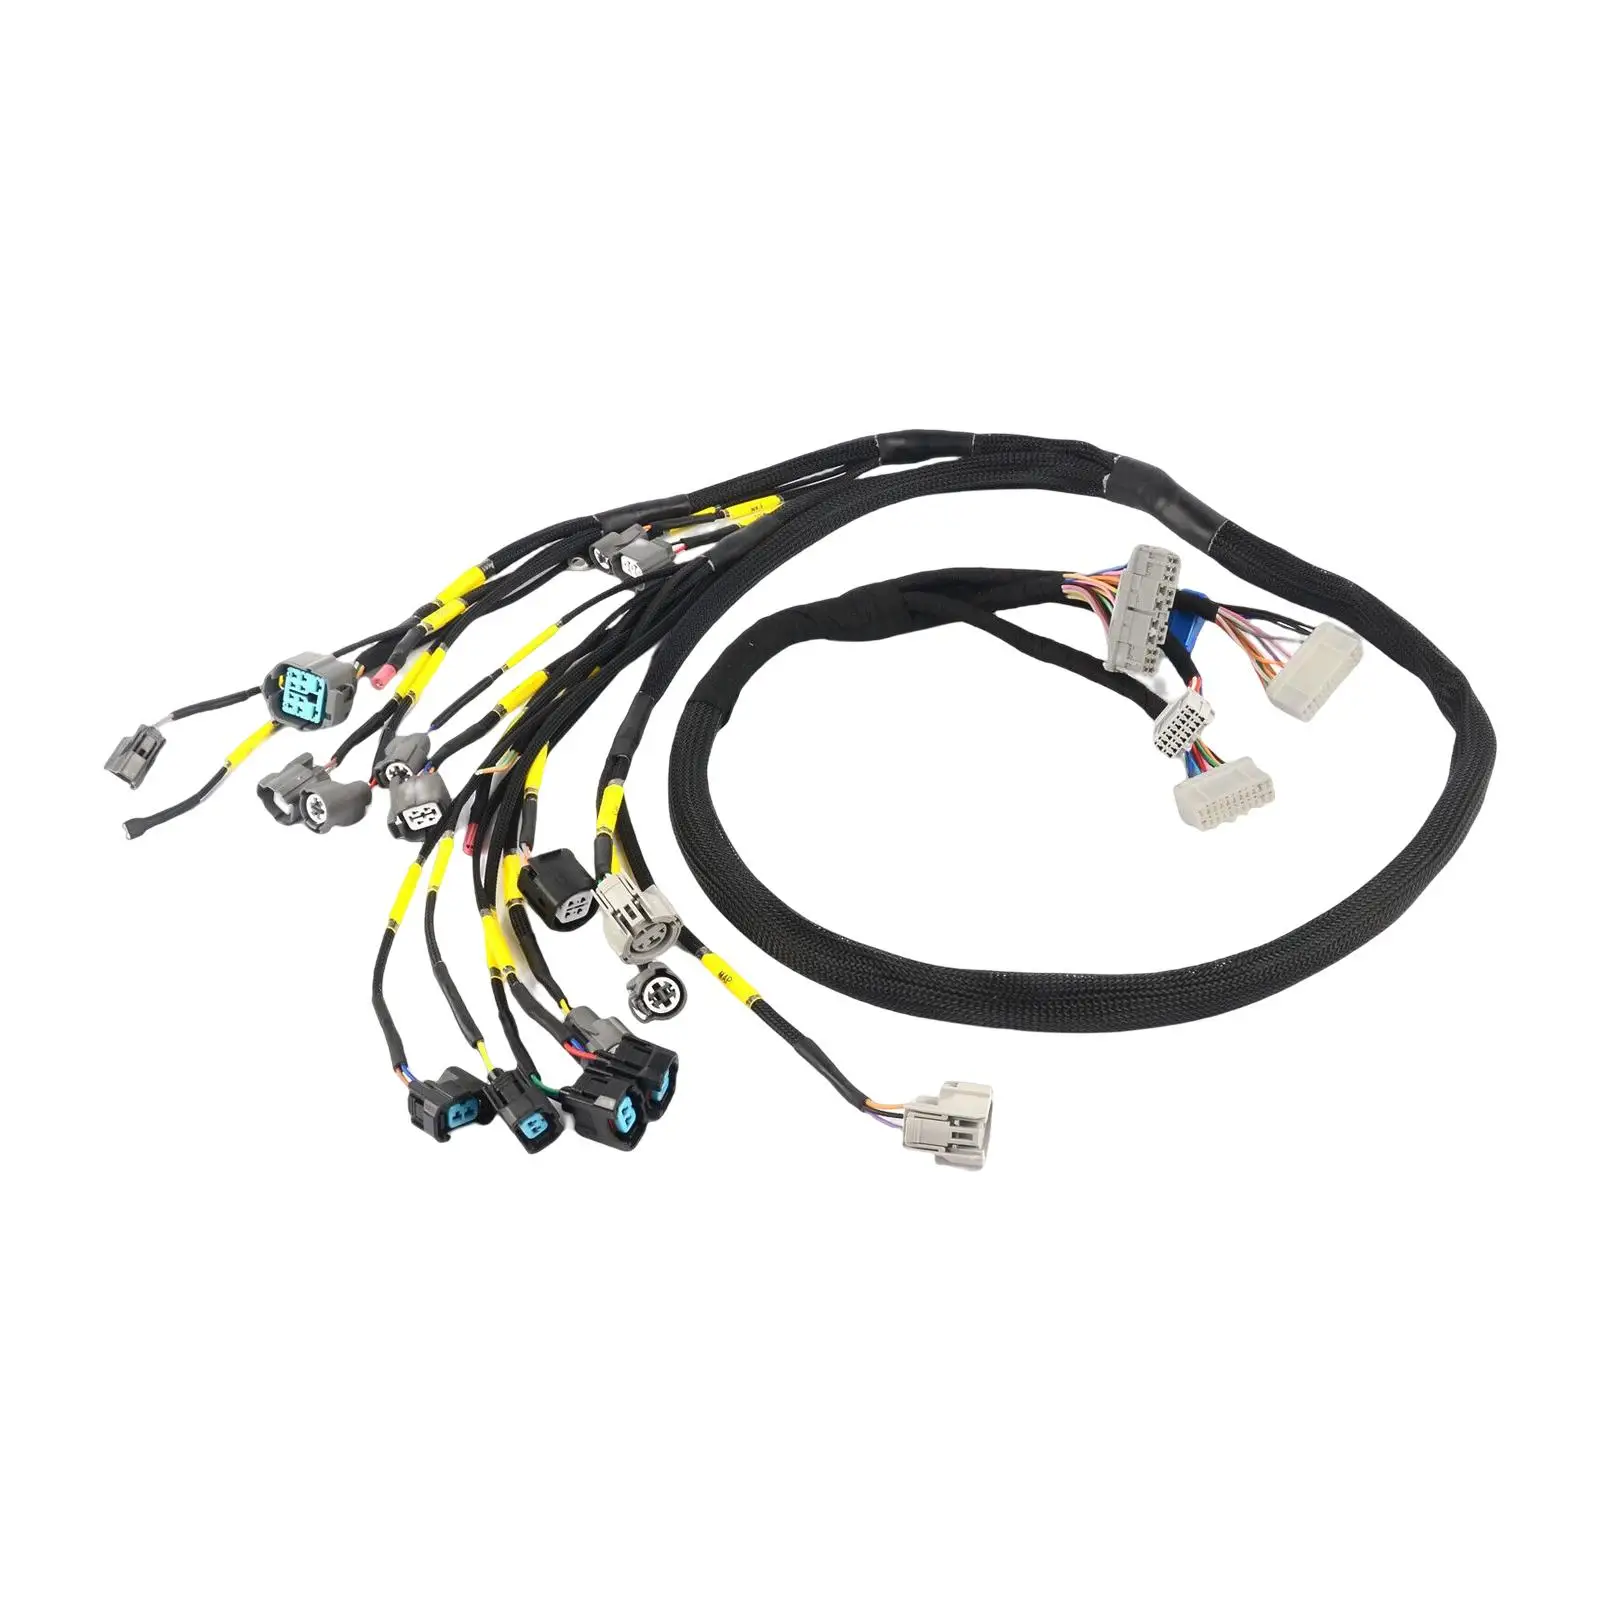 Car Engine Harness Cnch-Obd2-1 Vehicle Accessories Replaces Easily Install Spare Parts Professional Stable durable